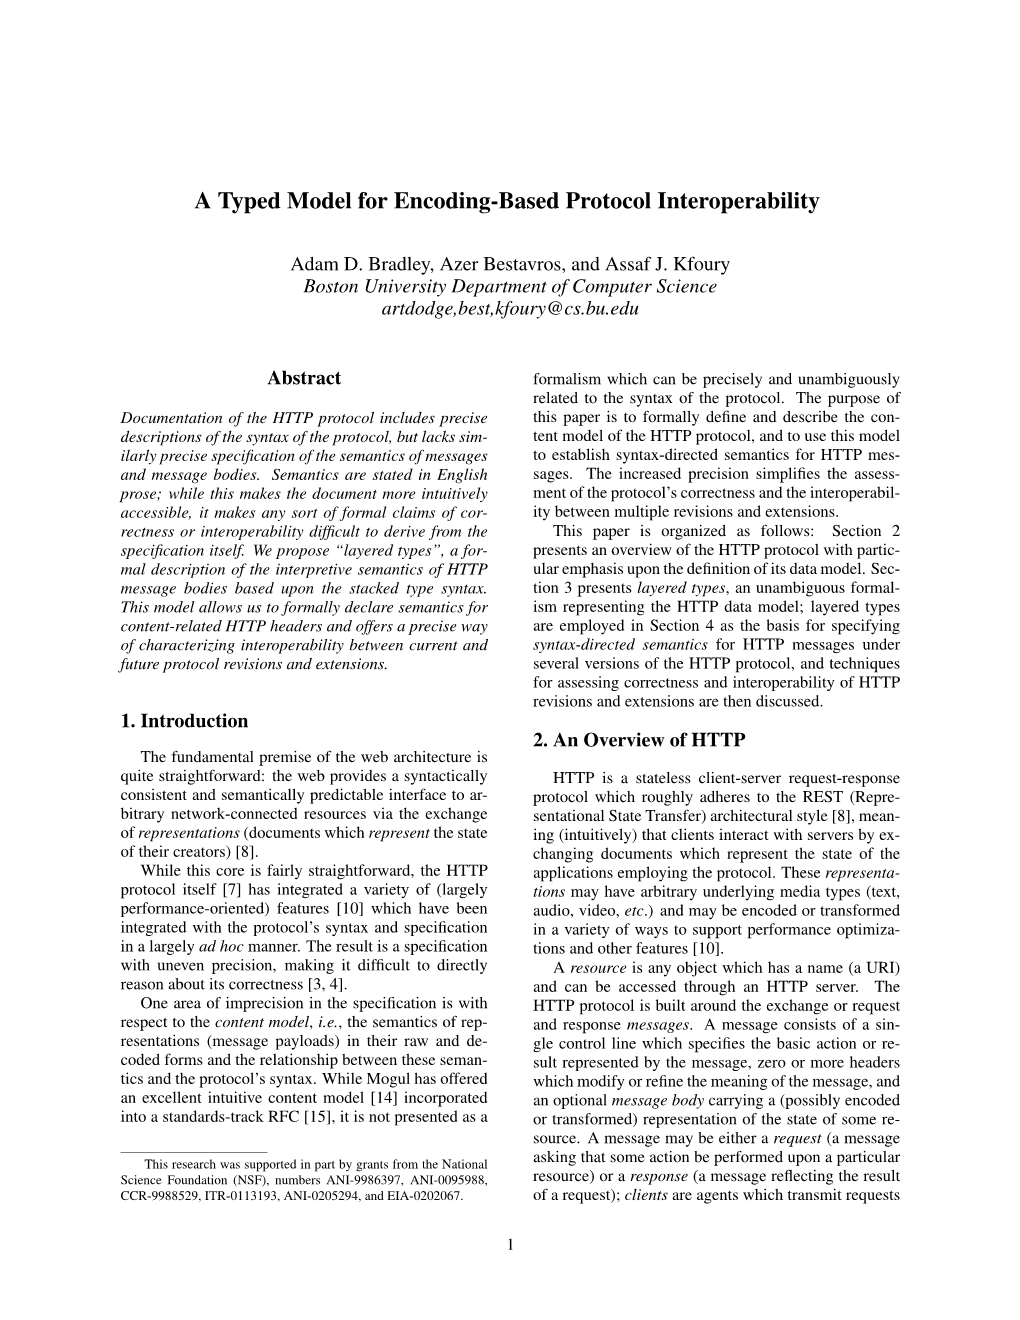 A Typed Model for Encoding-Based Protocol Interoperability ∗